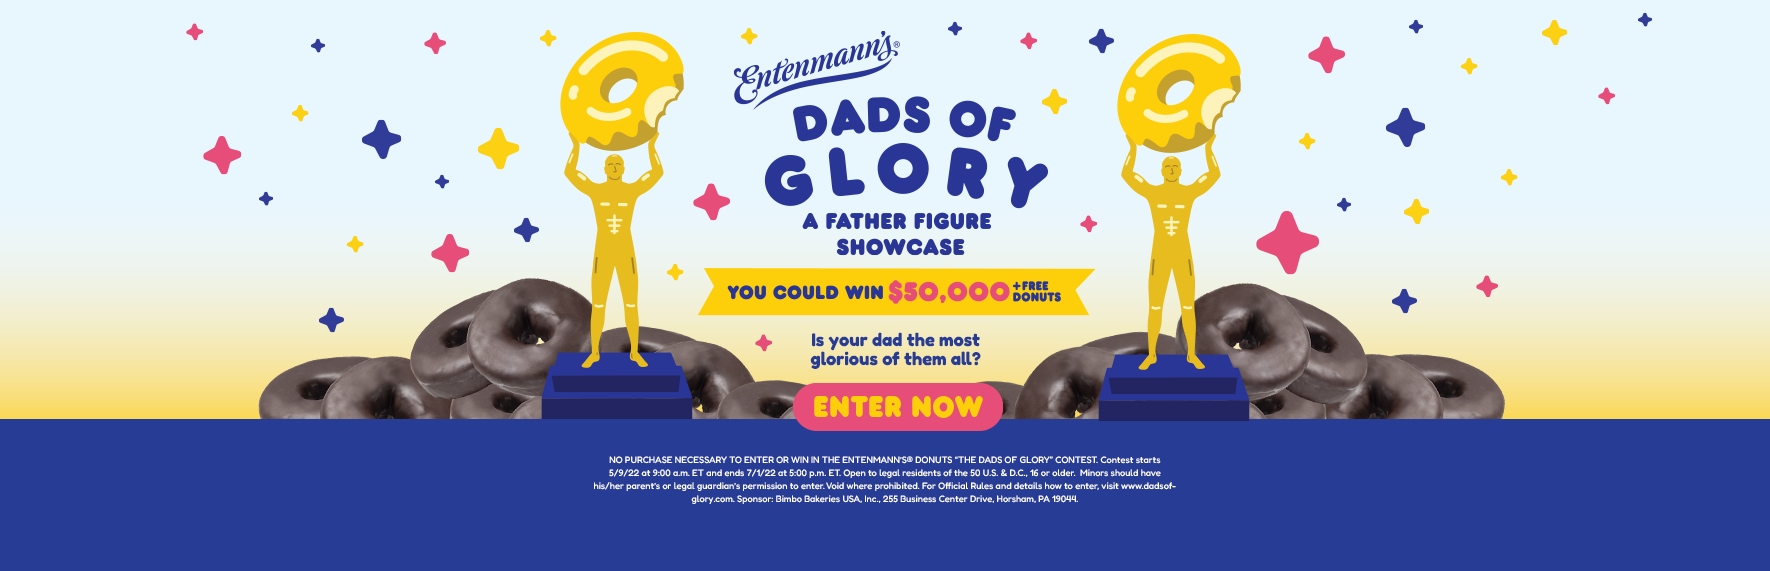 Dads of Glory. A Father Figure Showcase. Enter Now.